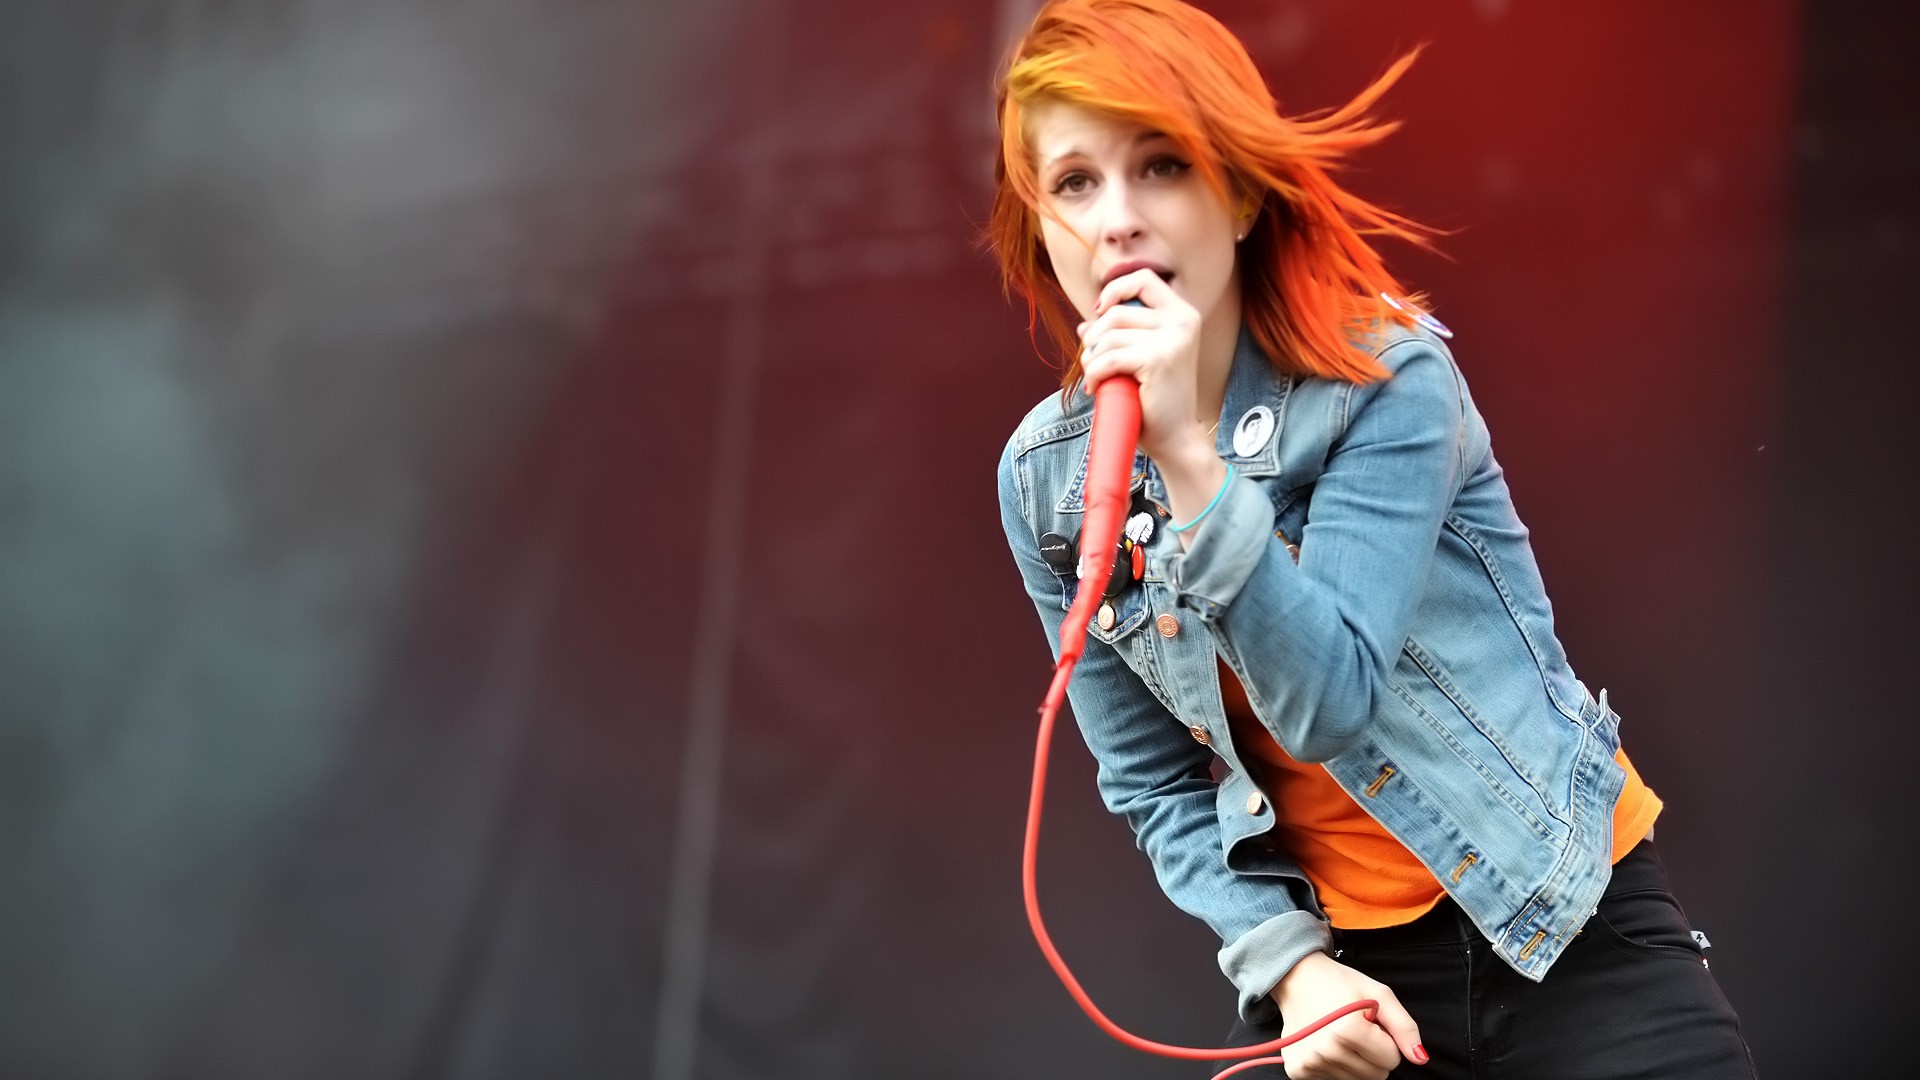 People 1920x1080 Hayley Williams women singer redhead dyed hair microphone celebrity